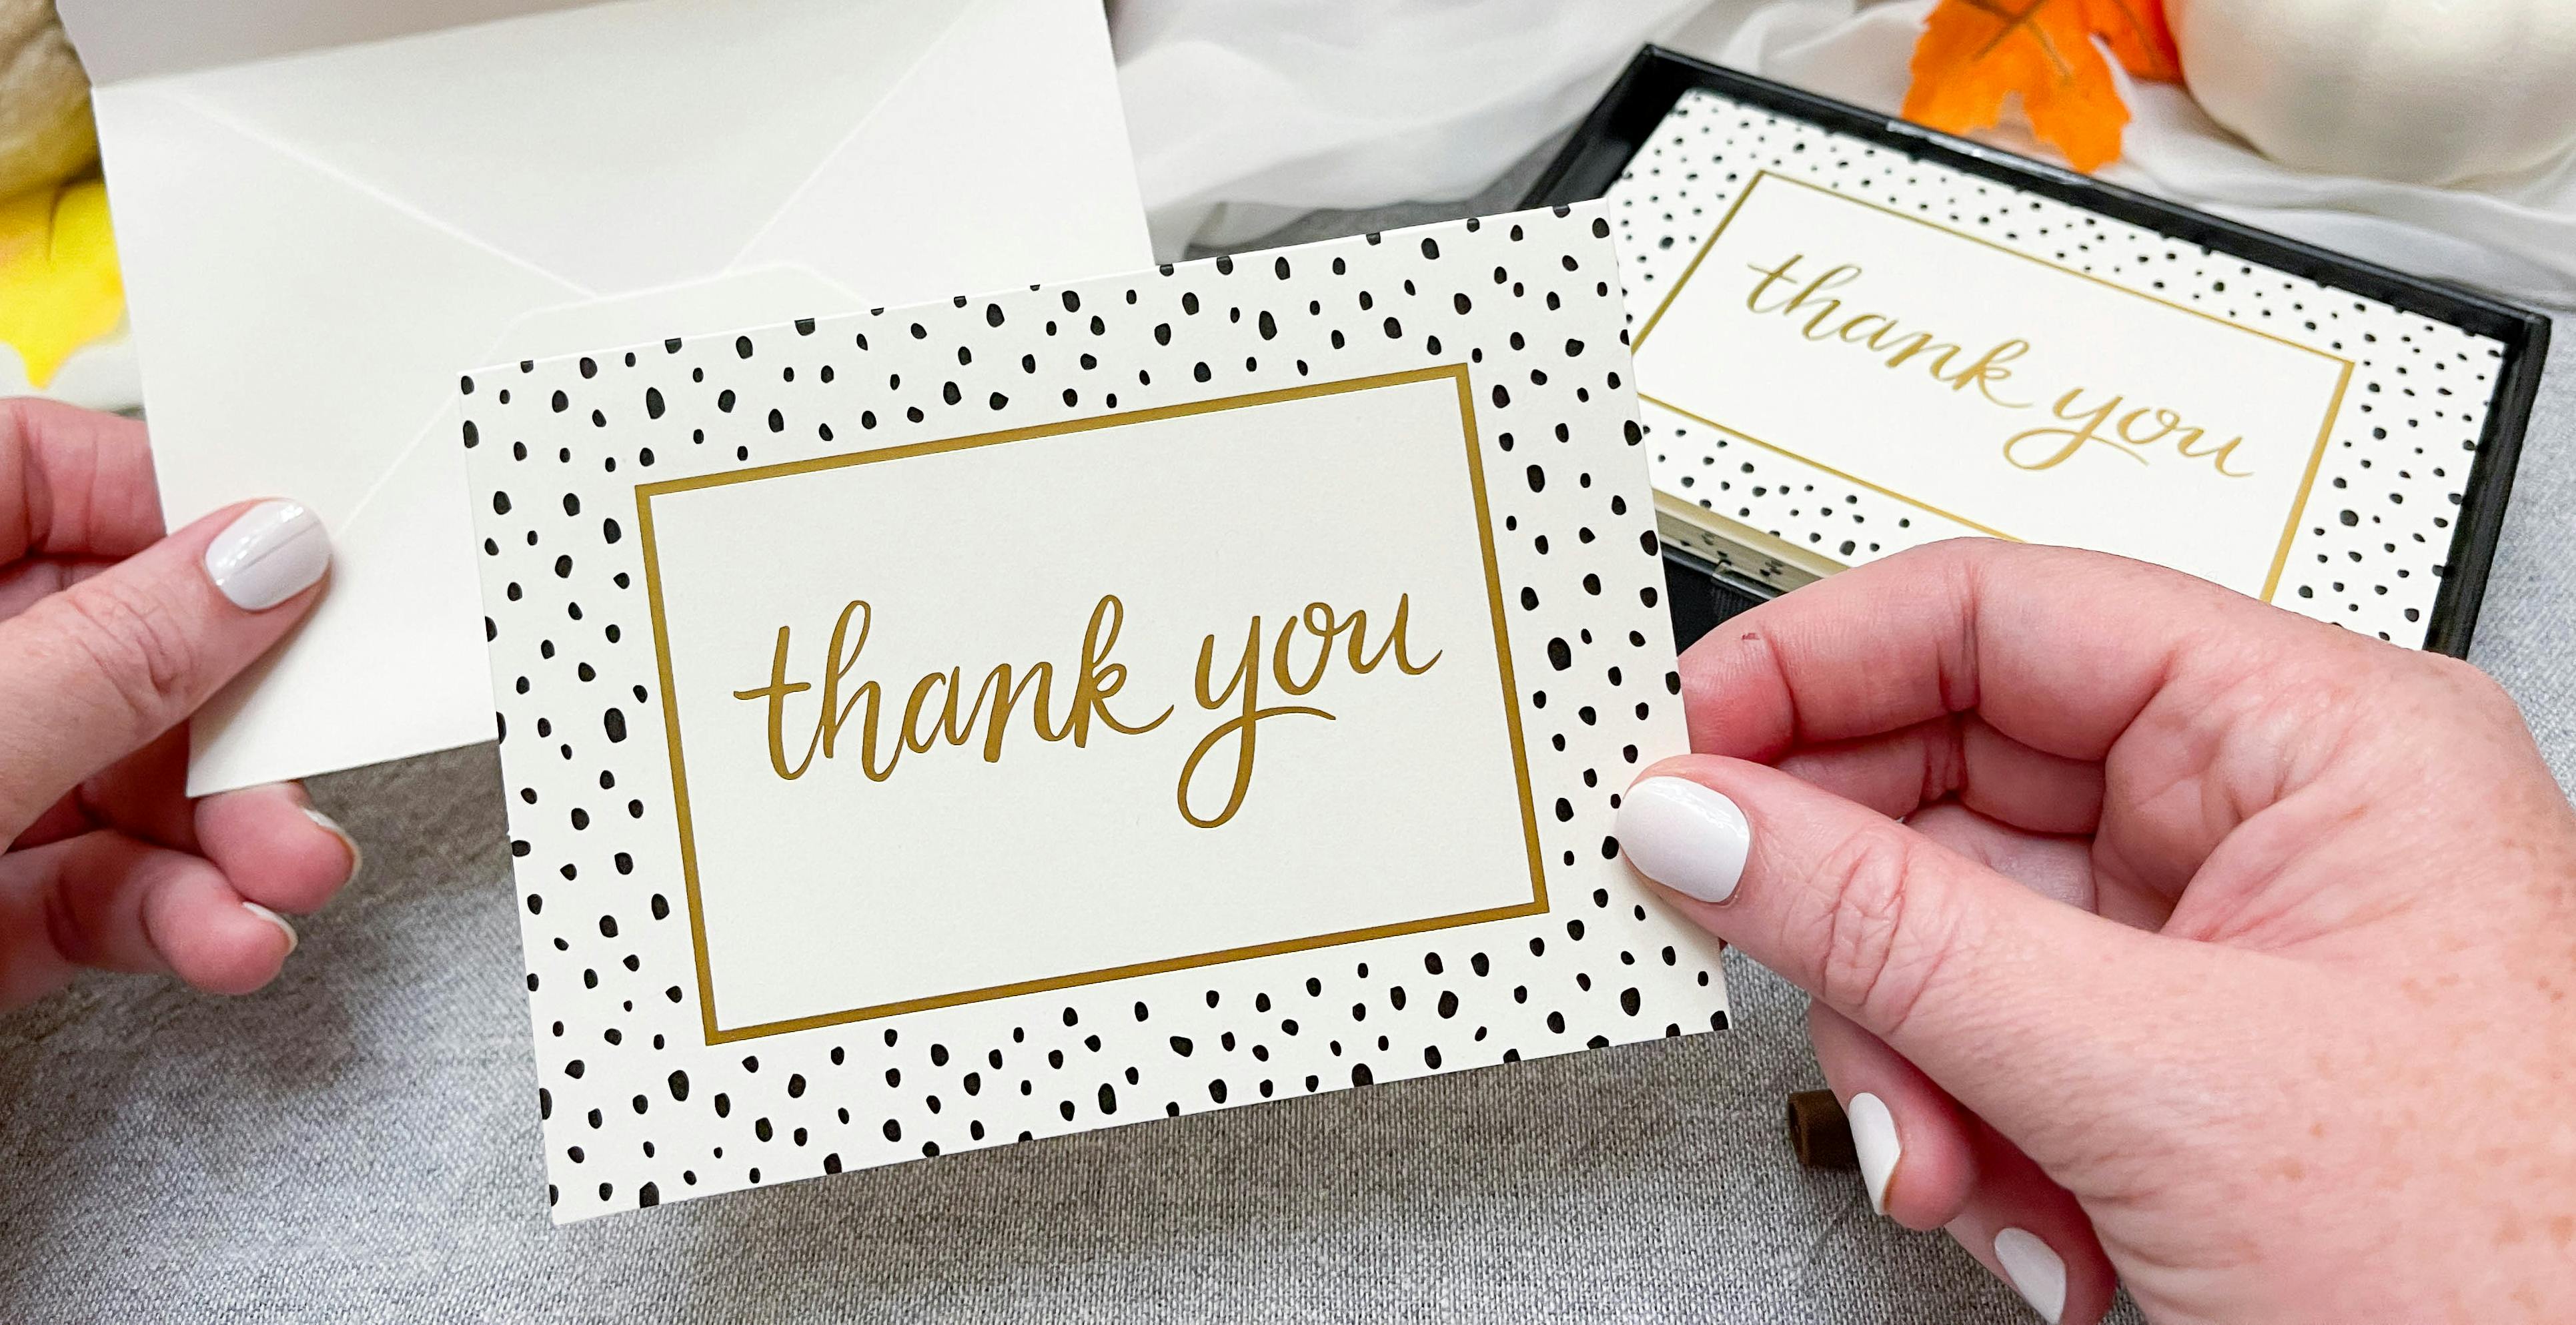 57 Thoughtful Messages For A Meaningful Thank You Note